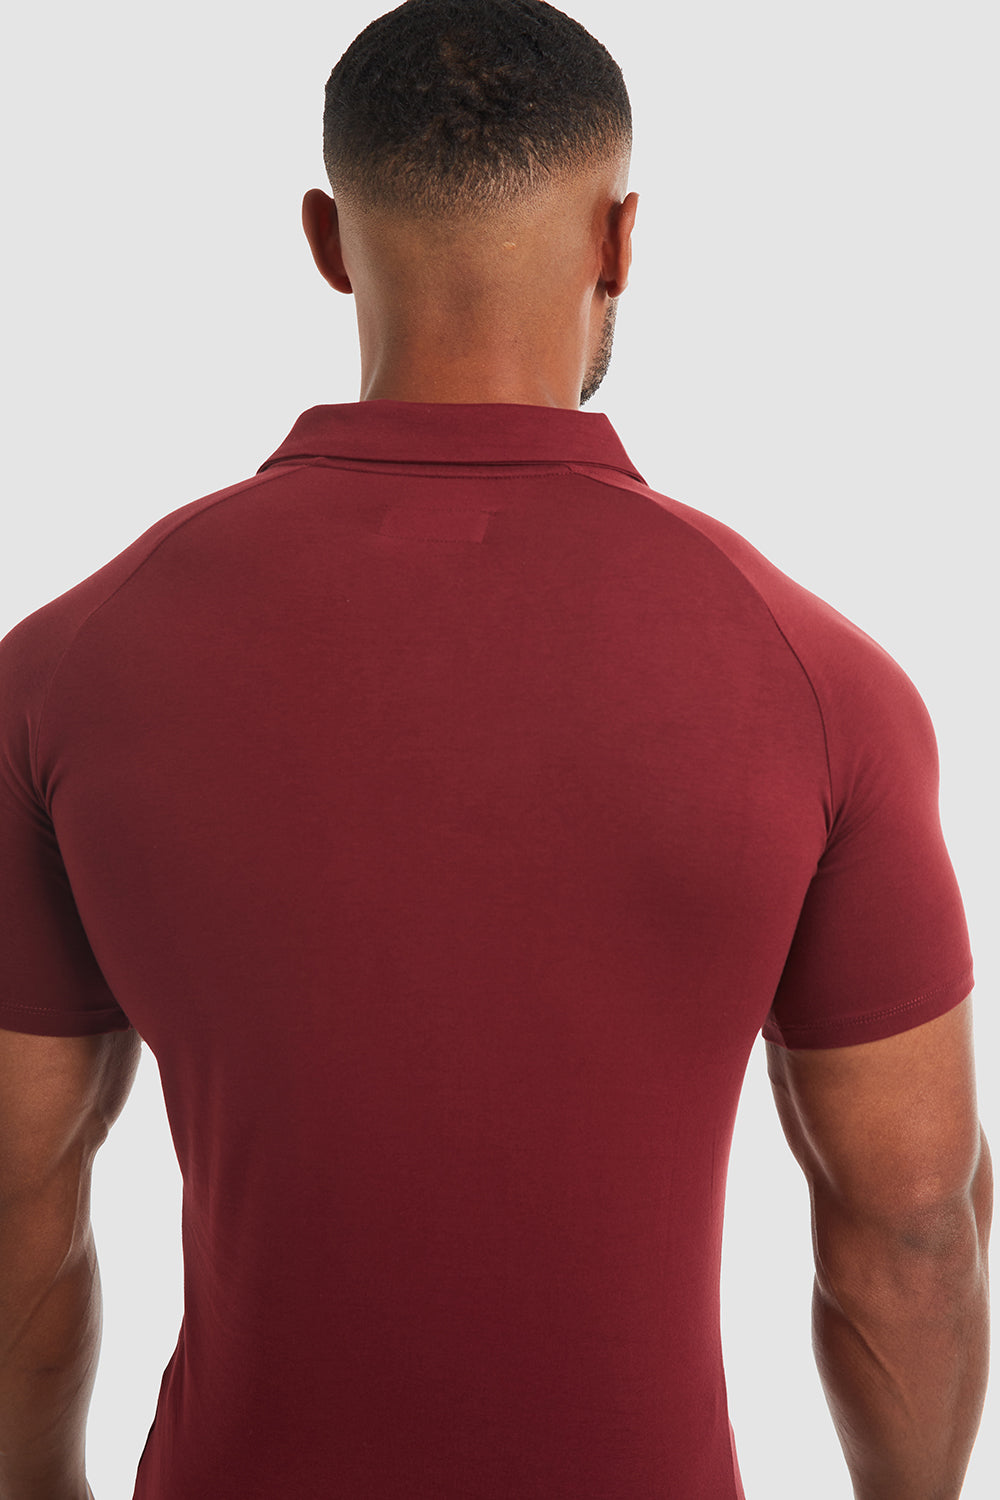 Tailored Athlete Athletic Fit Polo Shirt in Burgundy, L